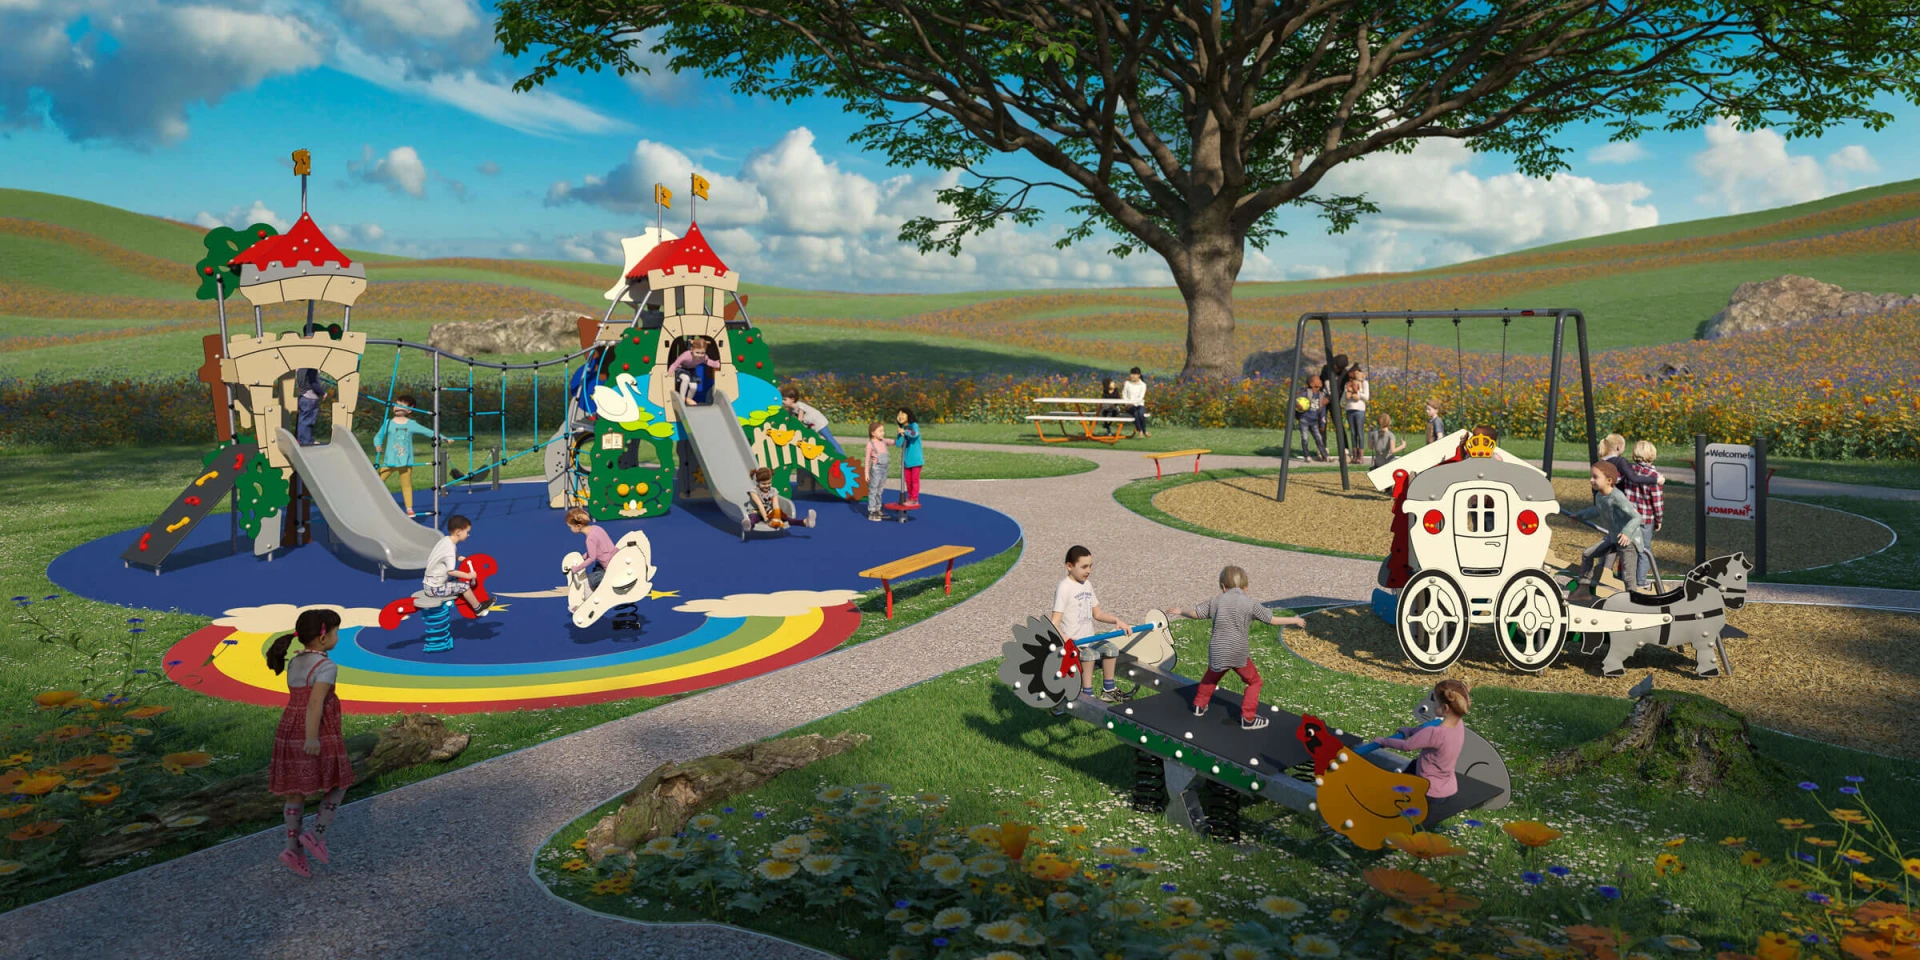 design idea of a playground with a fairy tale theme